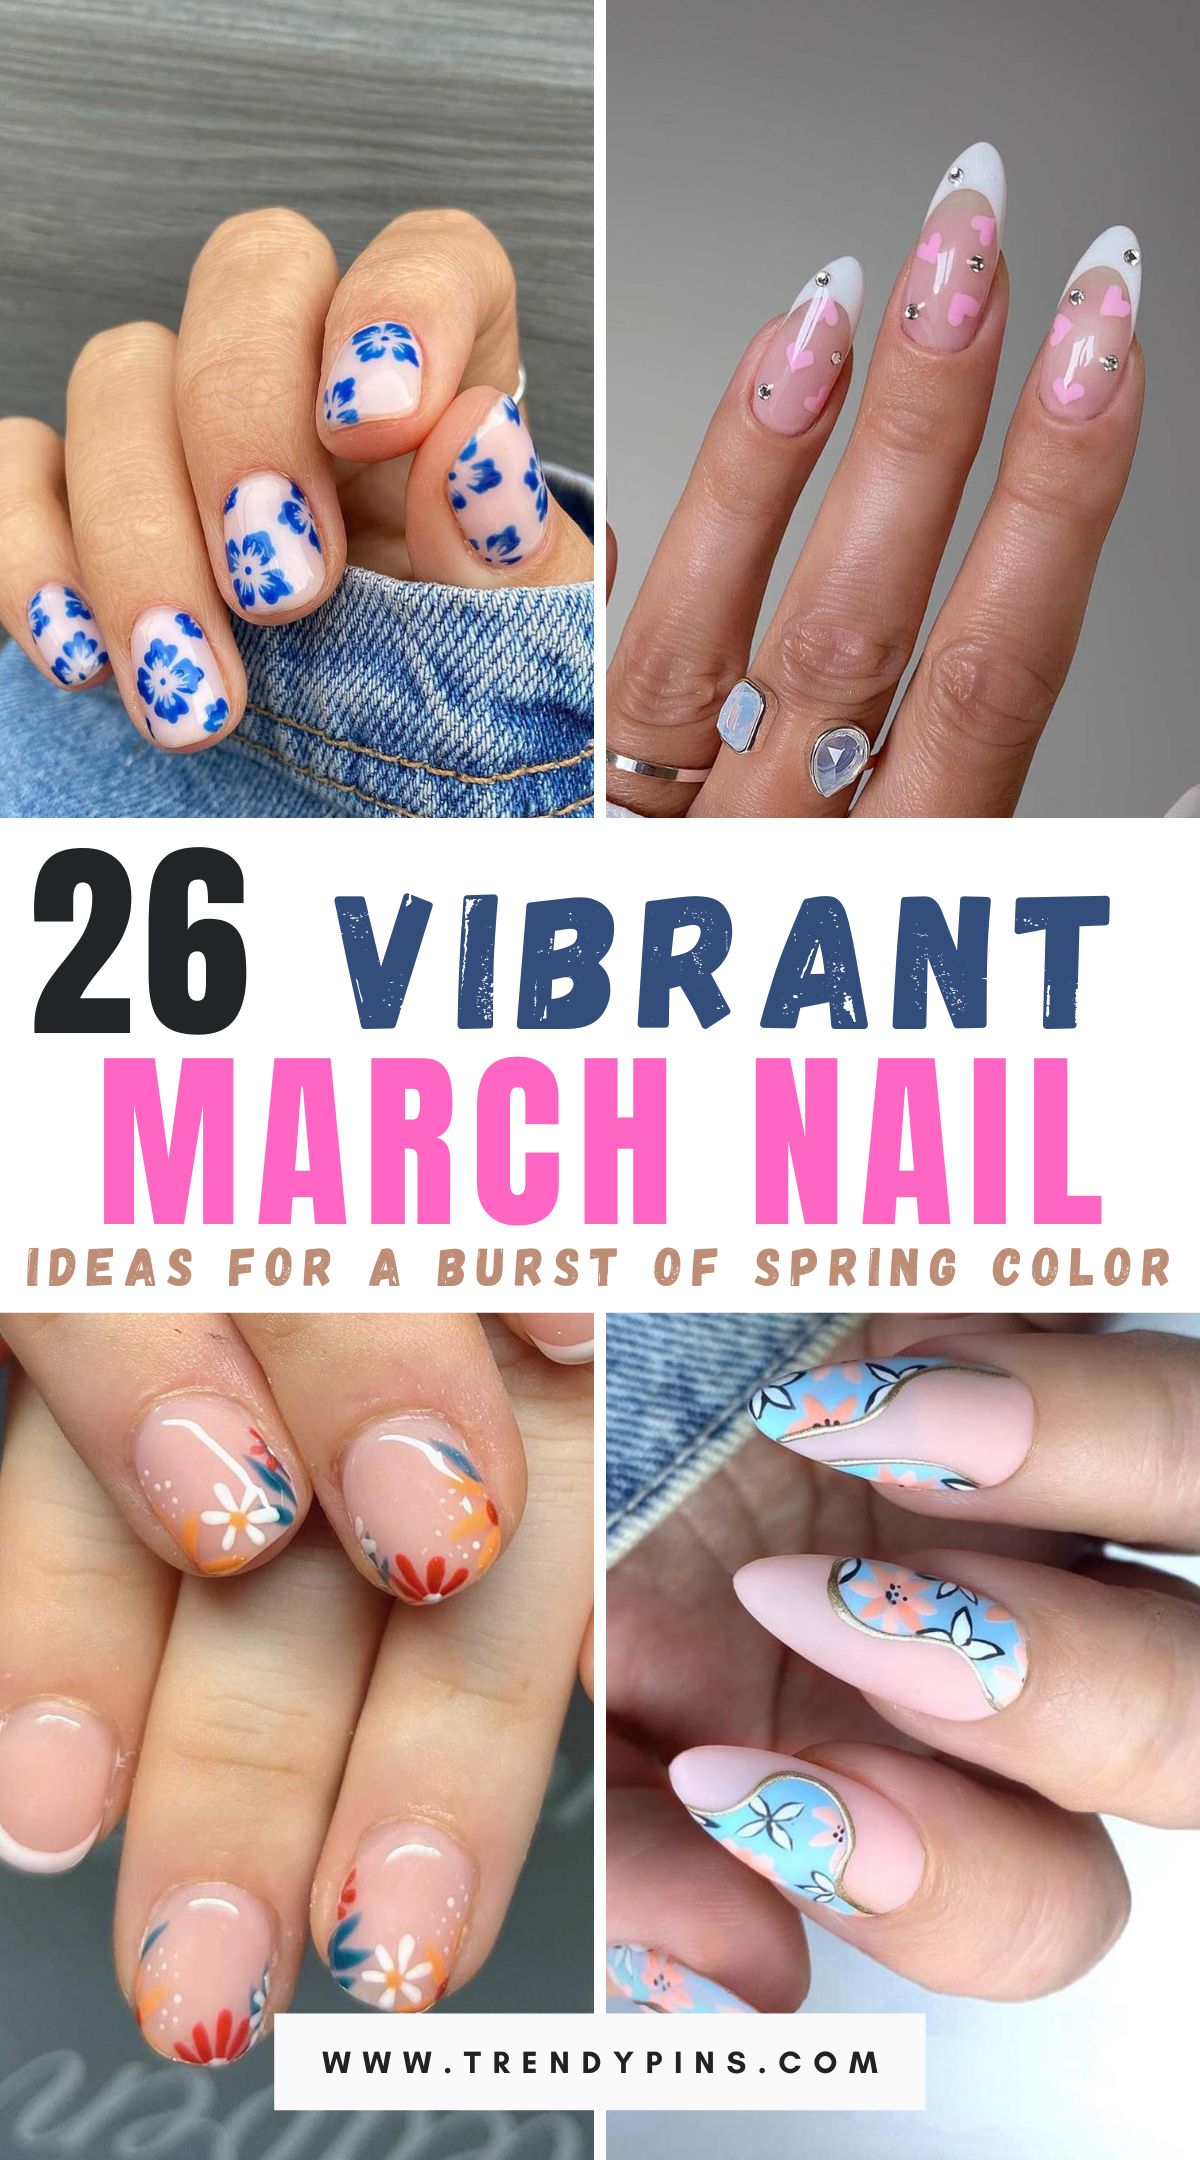 Welcome spring with style using these 26 best March nail designs. From fresh florals to pastel hues, explore a range of trendy and chic nail art ideas that capture the essence of the season and elevate your springtime look.